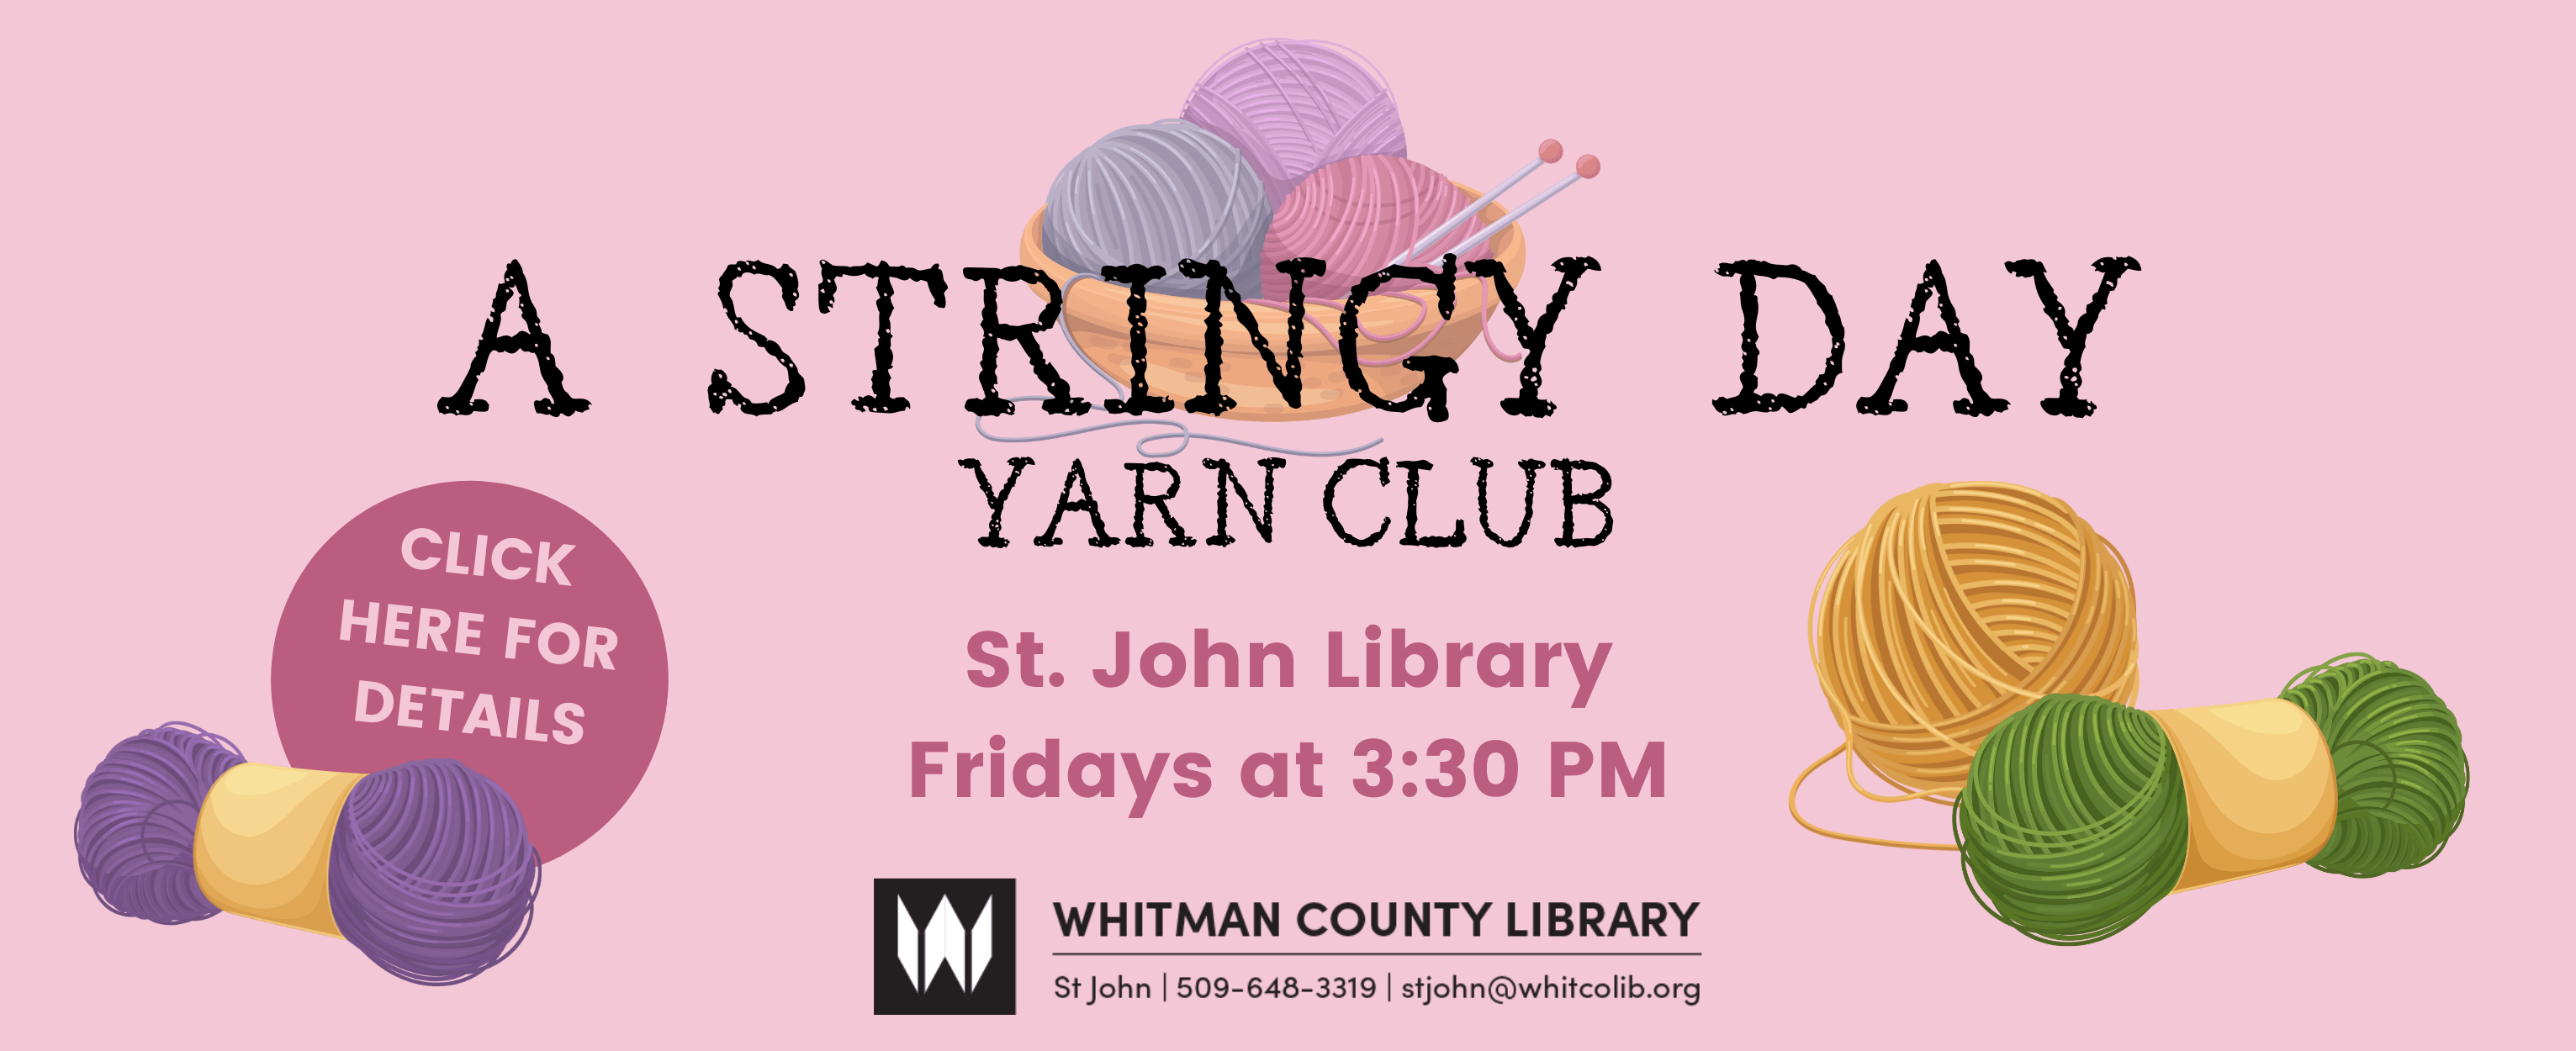 A Stringy Day Yarn Club will be happening every Friday at 3:30 PM in St. John. Bring your own materials, click here for more information.